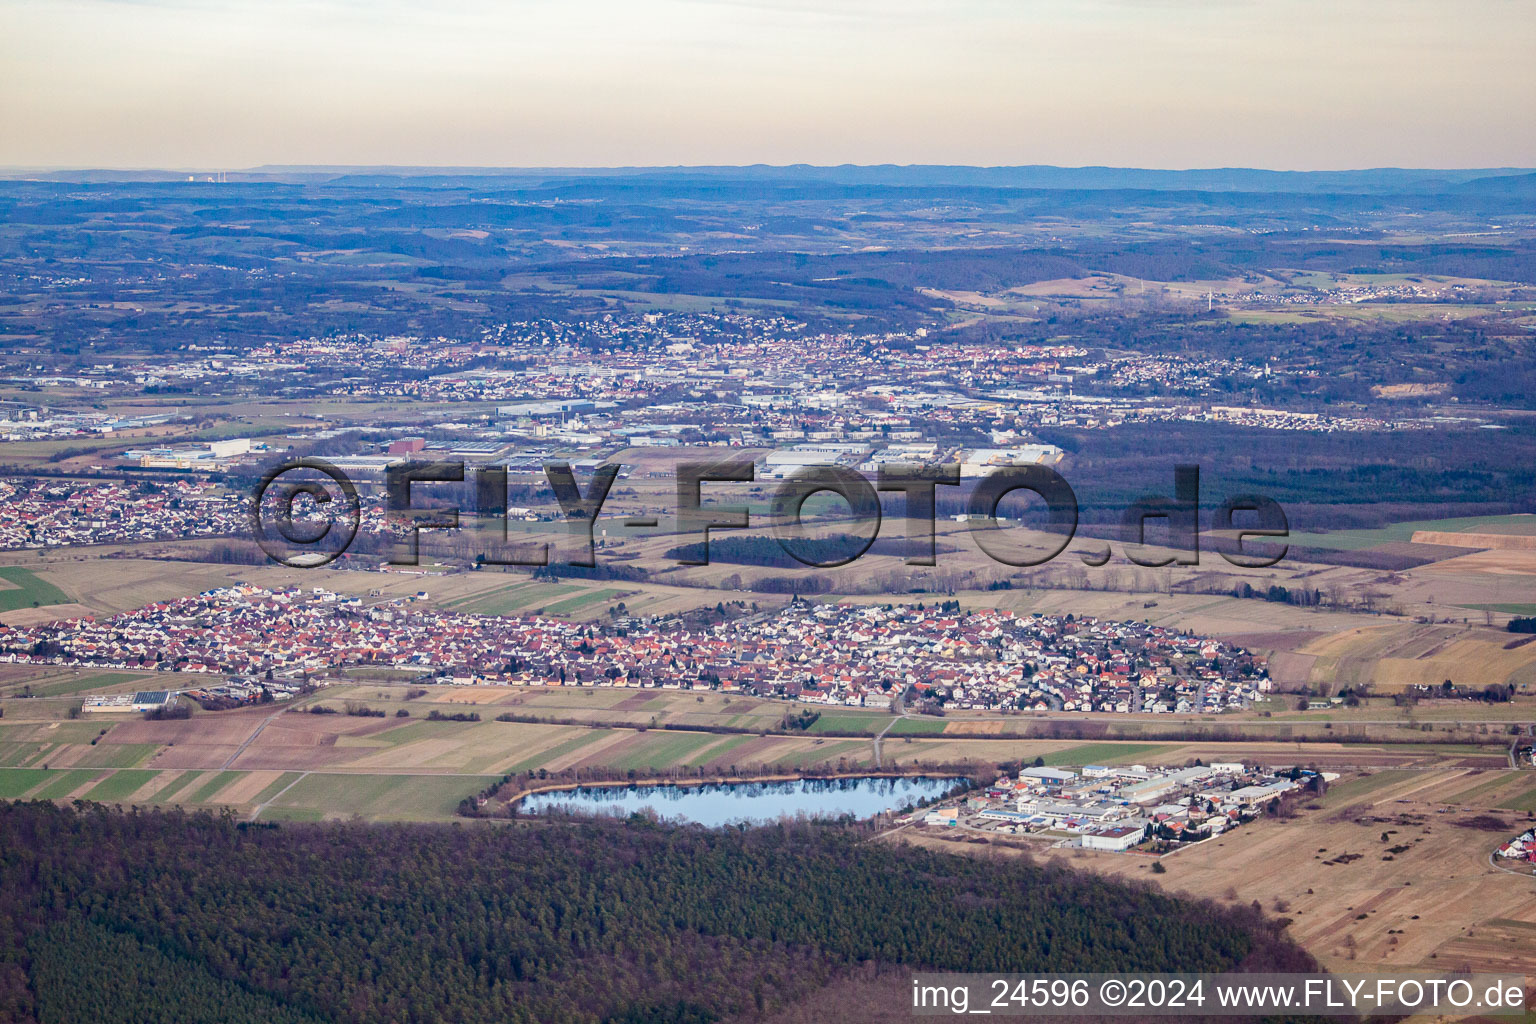 From northwest in the district Neuthard in Karlsdorf-Neuthard in the state Baden-Wuerttemberg, Germany